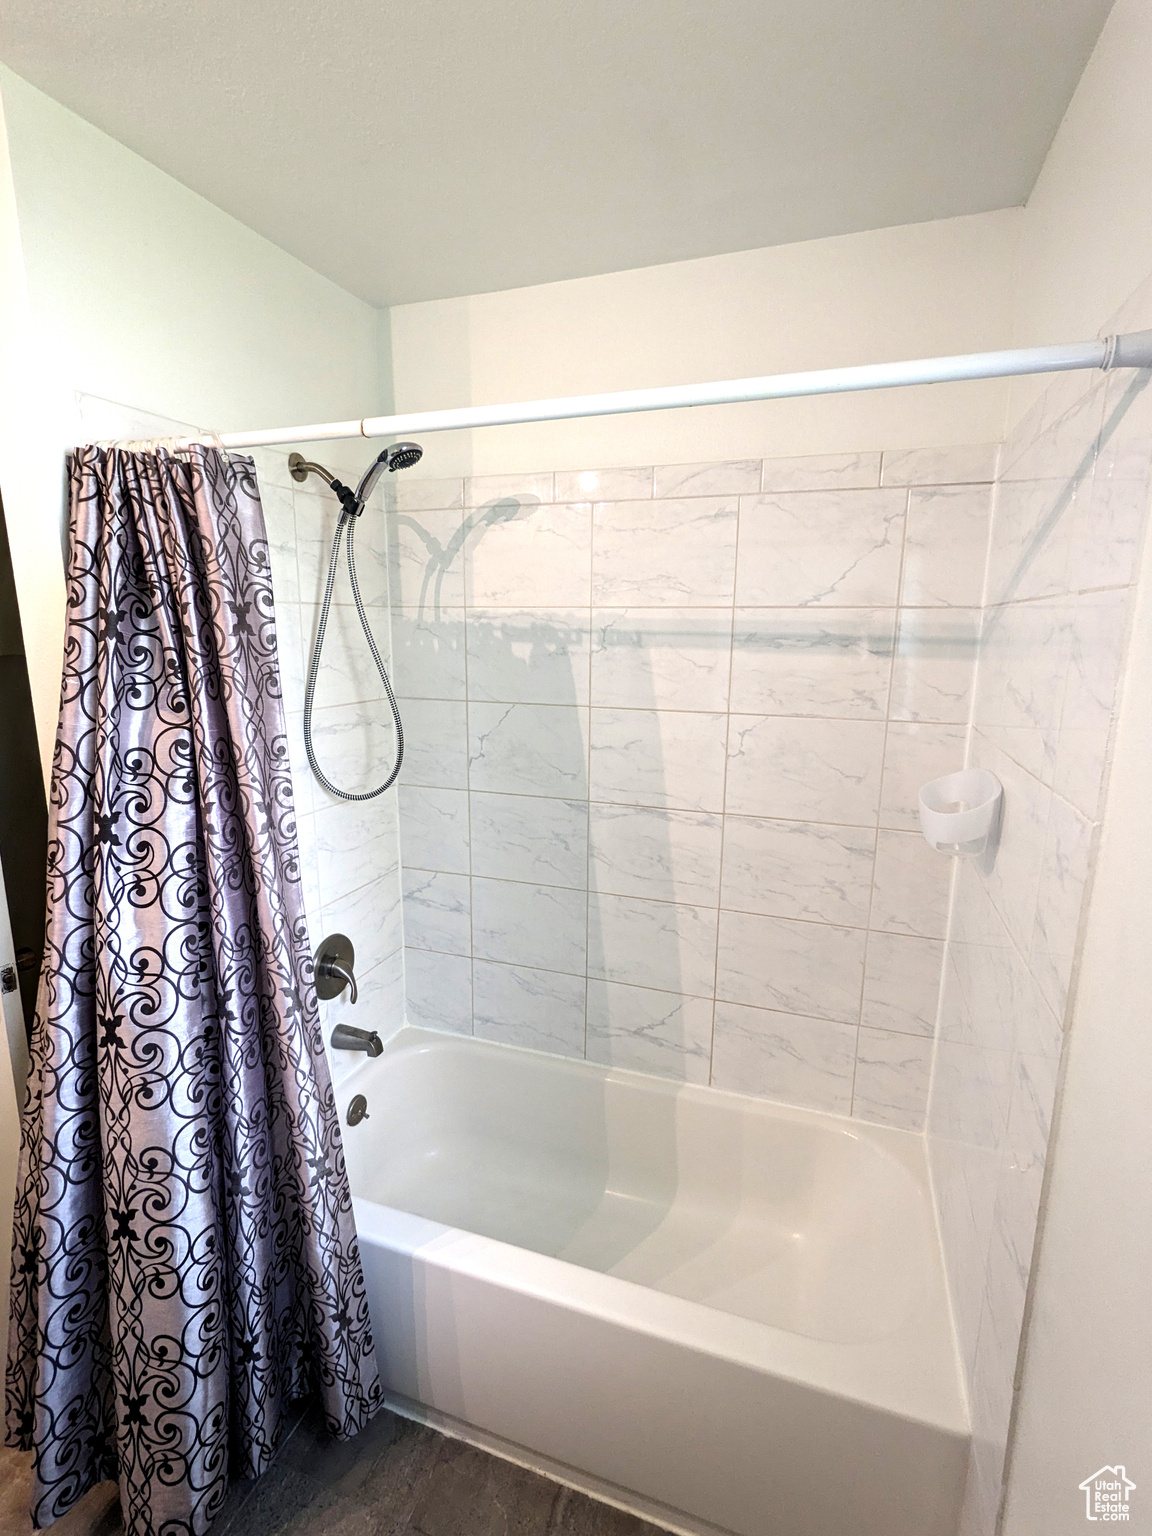 Bathroom featuring hardwood / wood-style flooring and shower / tub combo with curtain